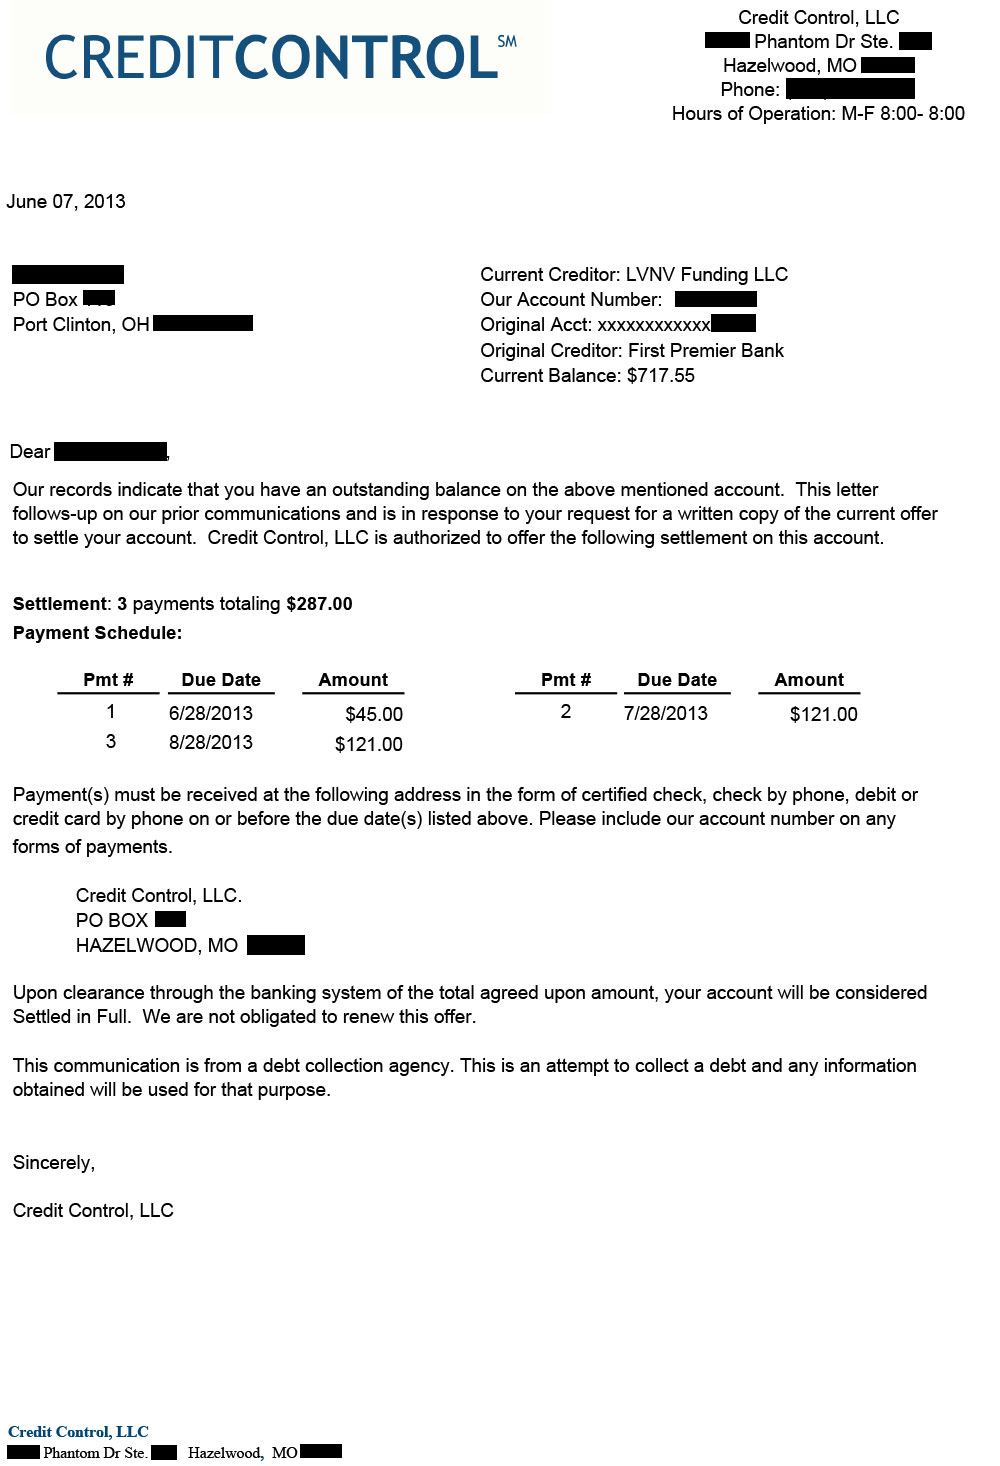 Client CA2 from CA saved $4,979